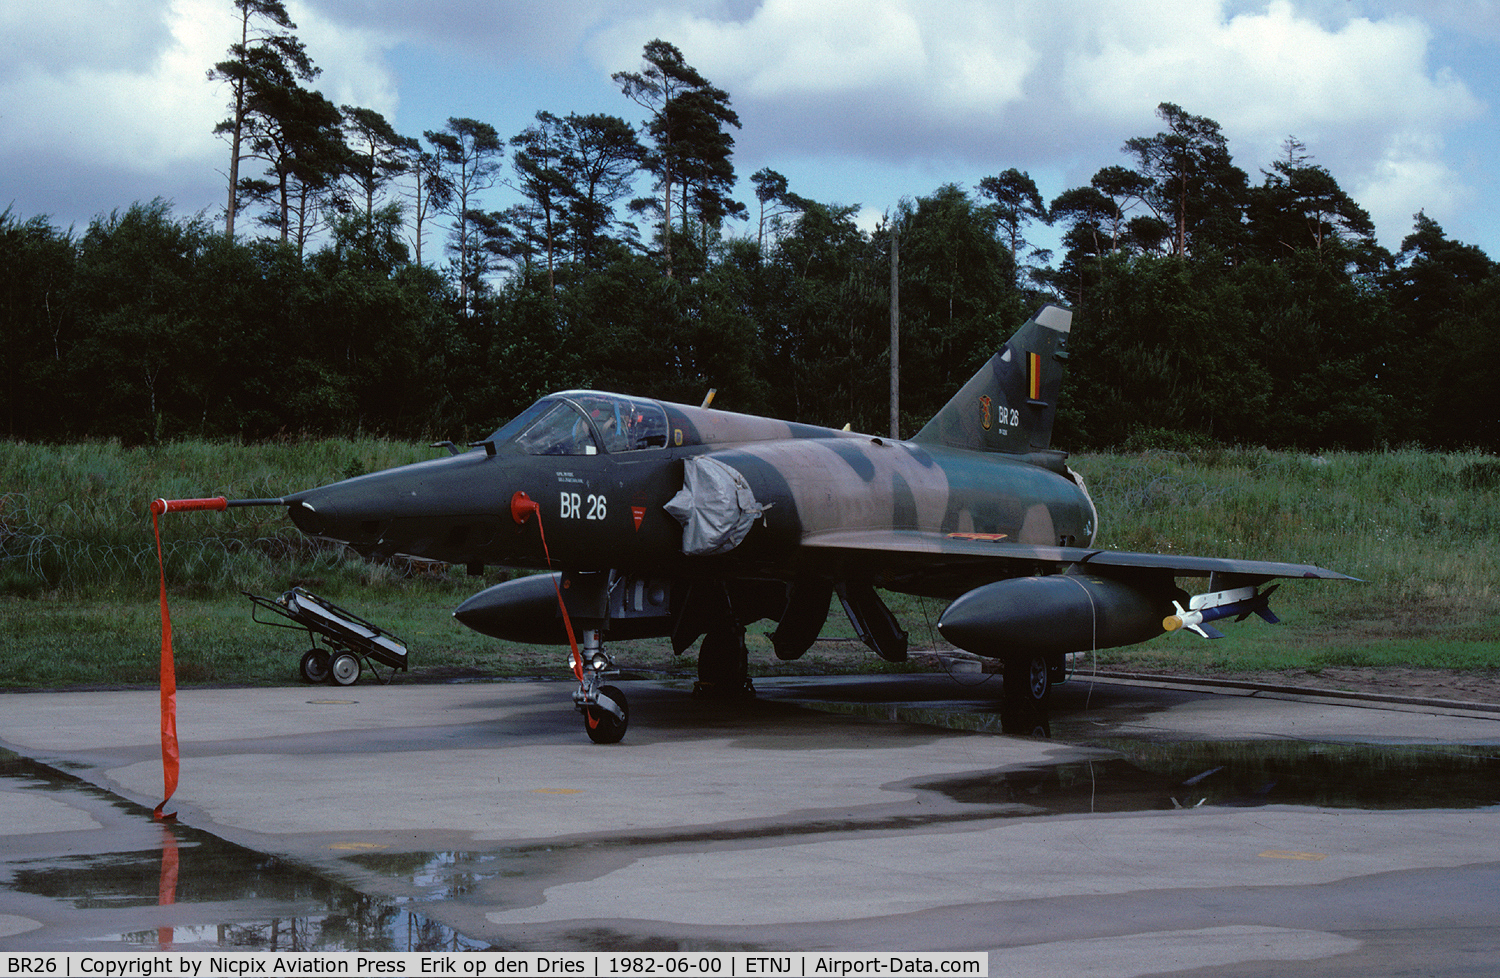 BR26, Dassault Mirage 5BR C/N 326, Belgium AF Mirage-VBR recce-fighter seen here in a dispersal at Jever AB, Germany, during the TAM 1982